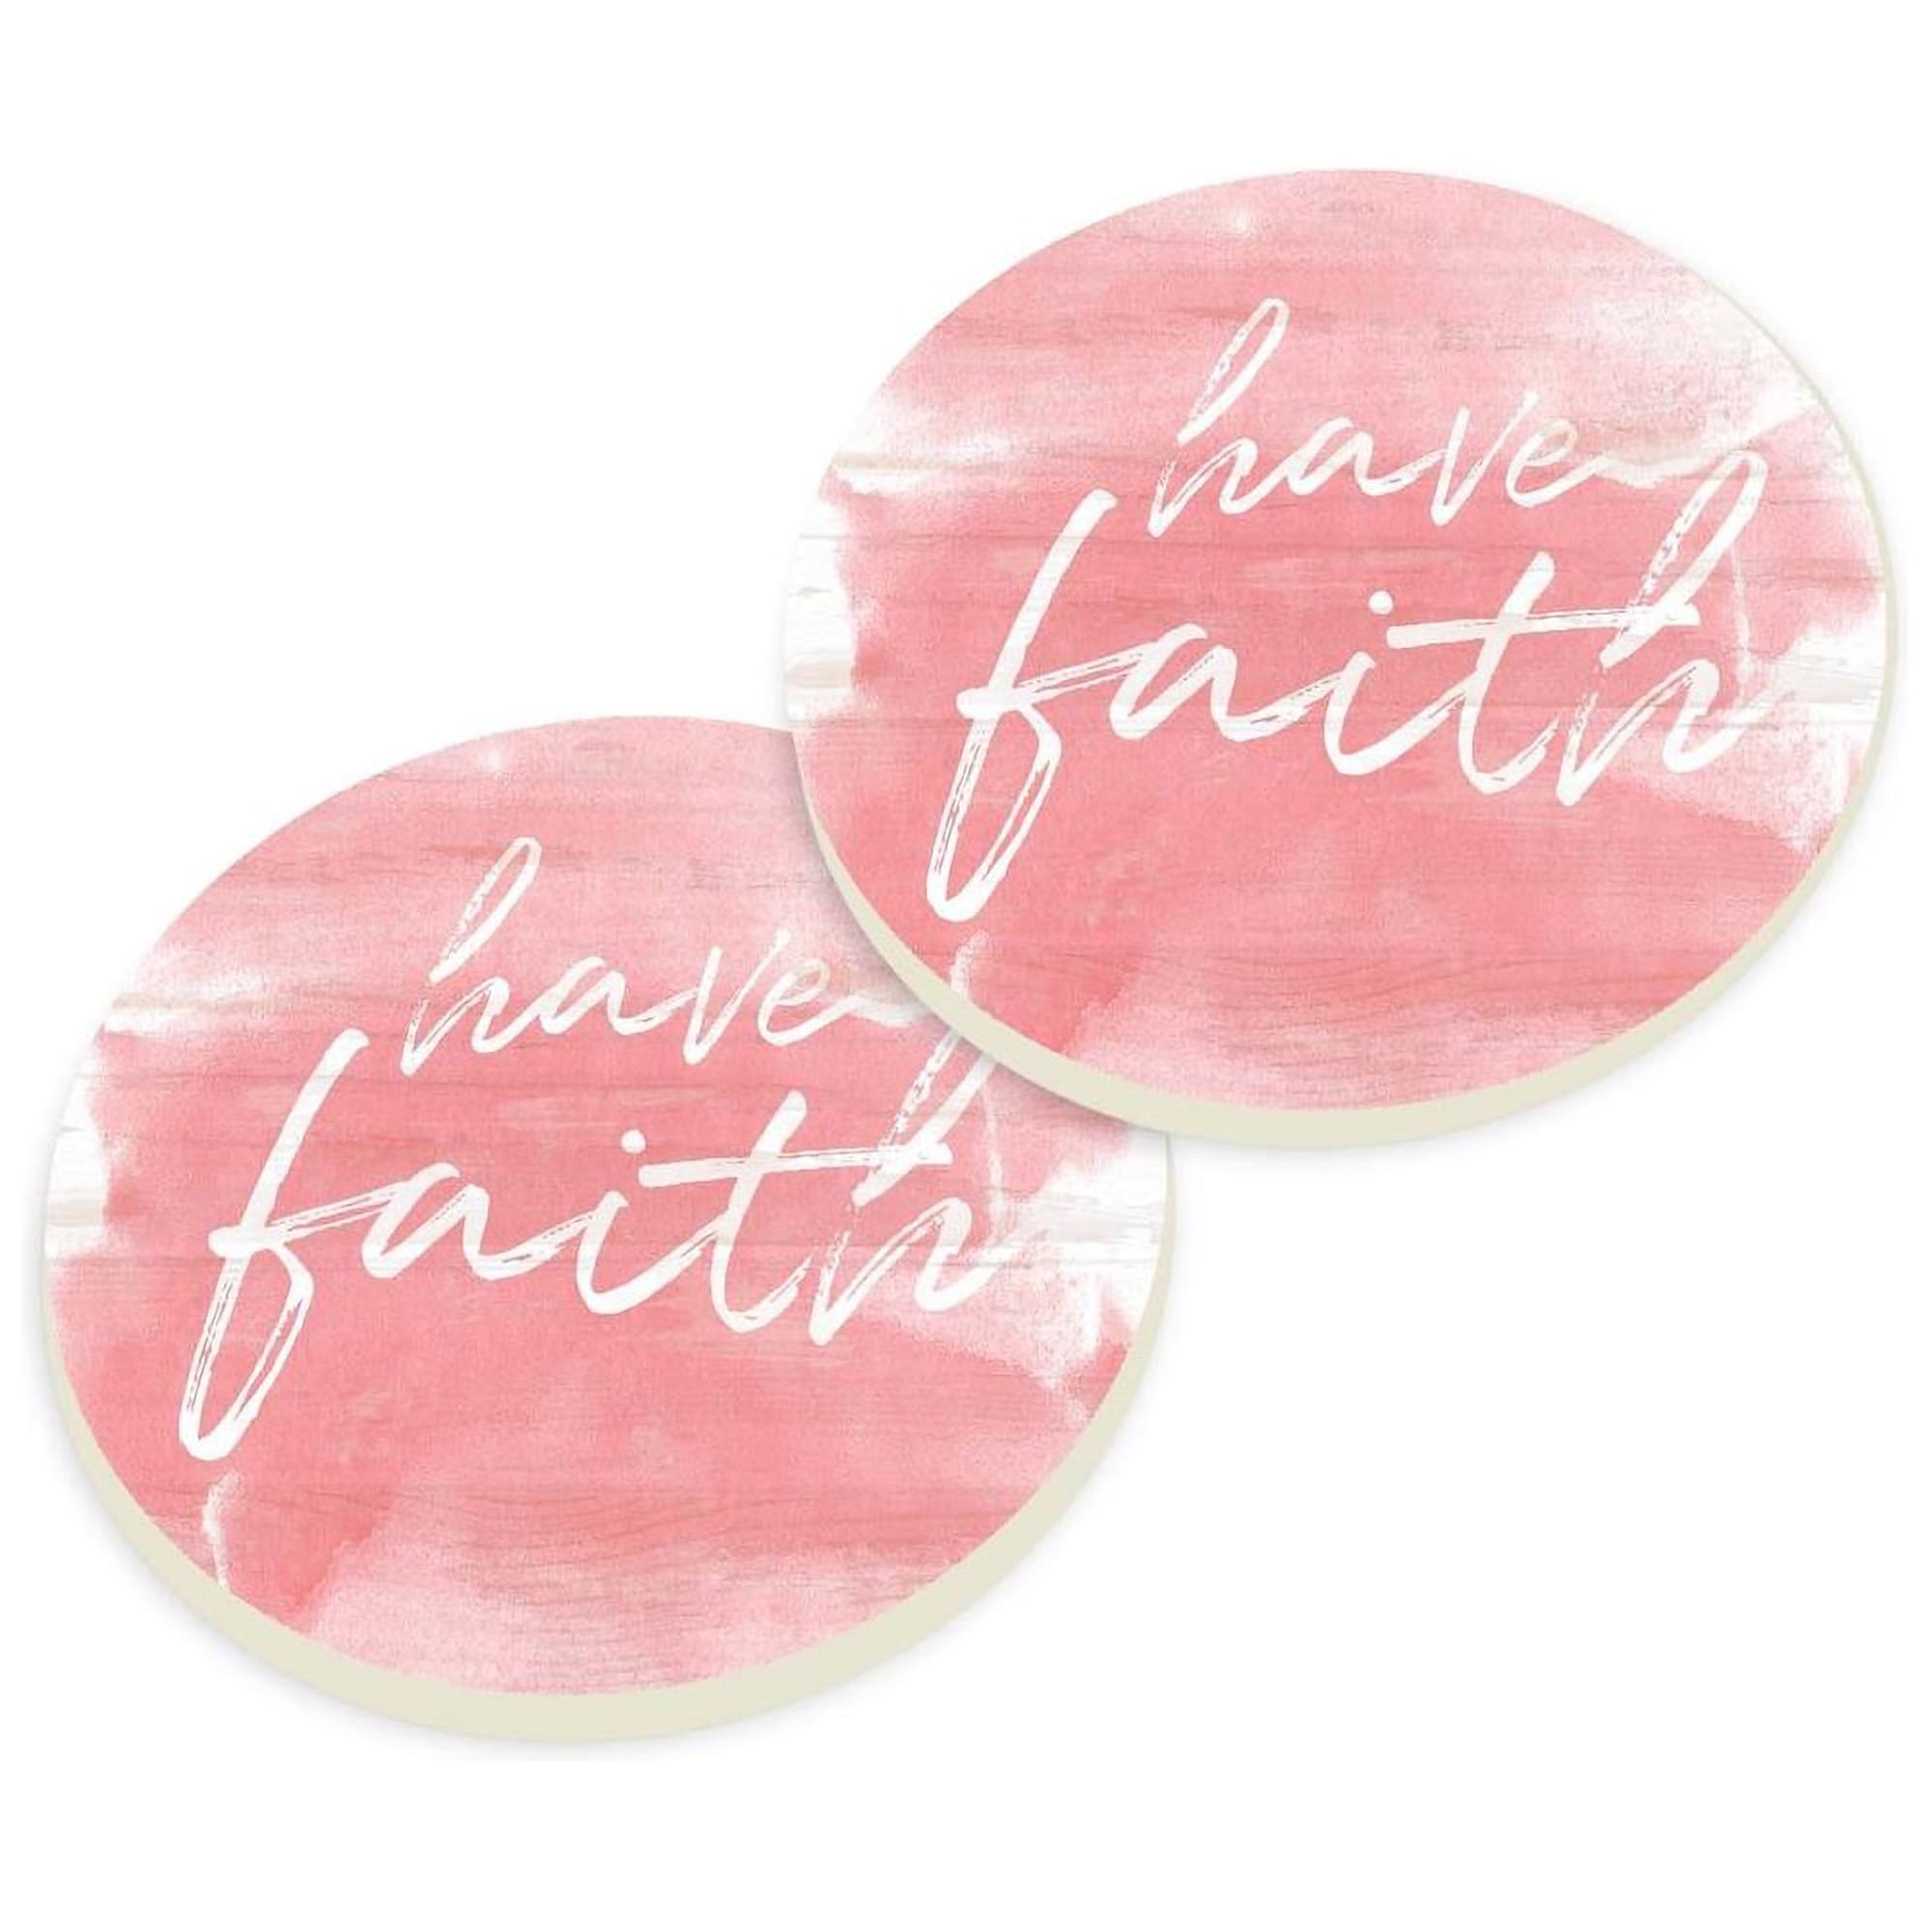 Have faith 2.75 x 2.75 Absorbent Ceramic Car Coasters Pack of 2 